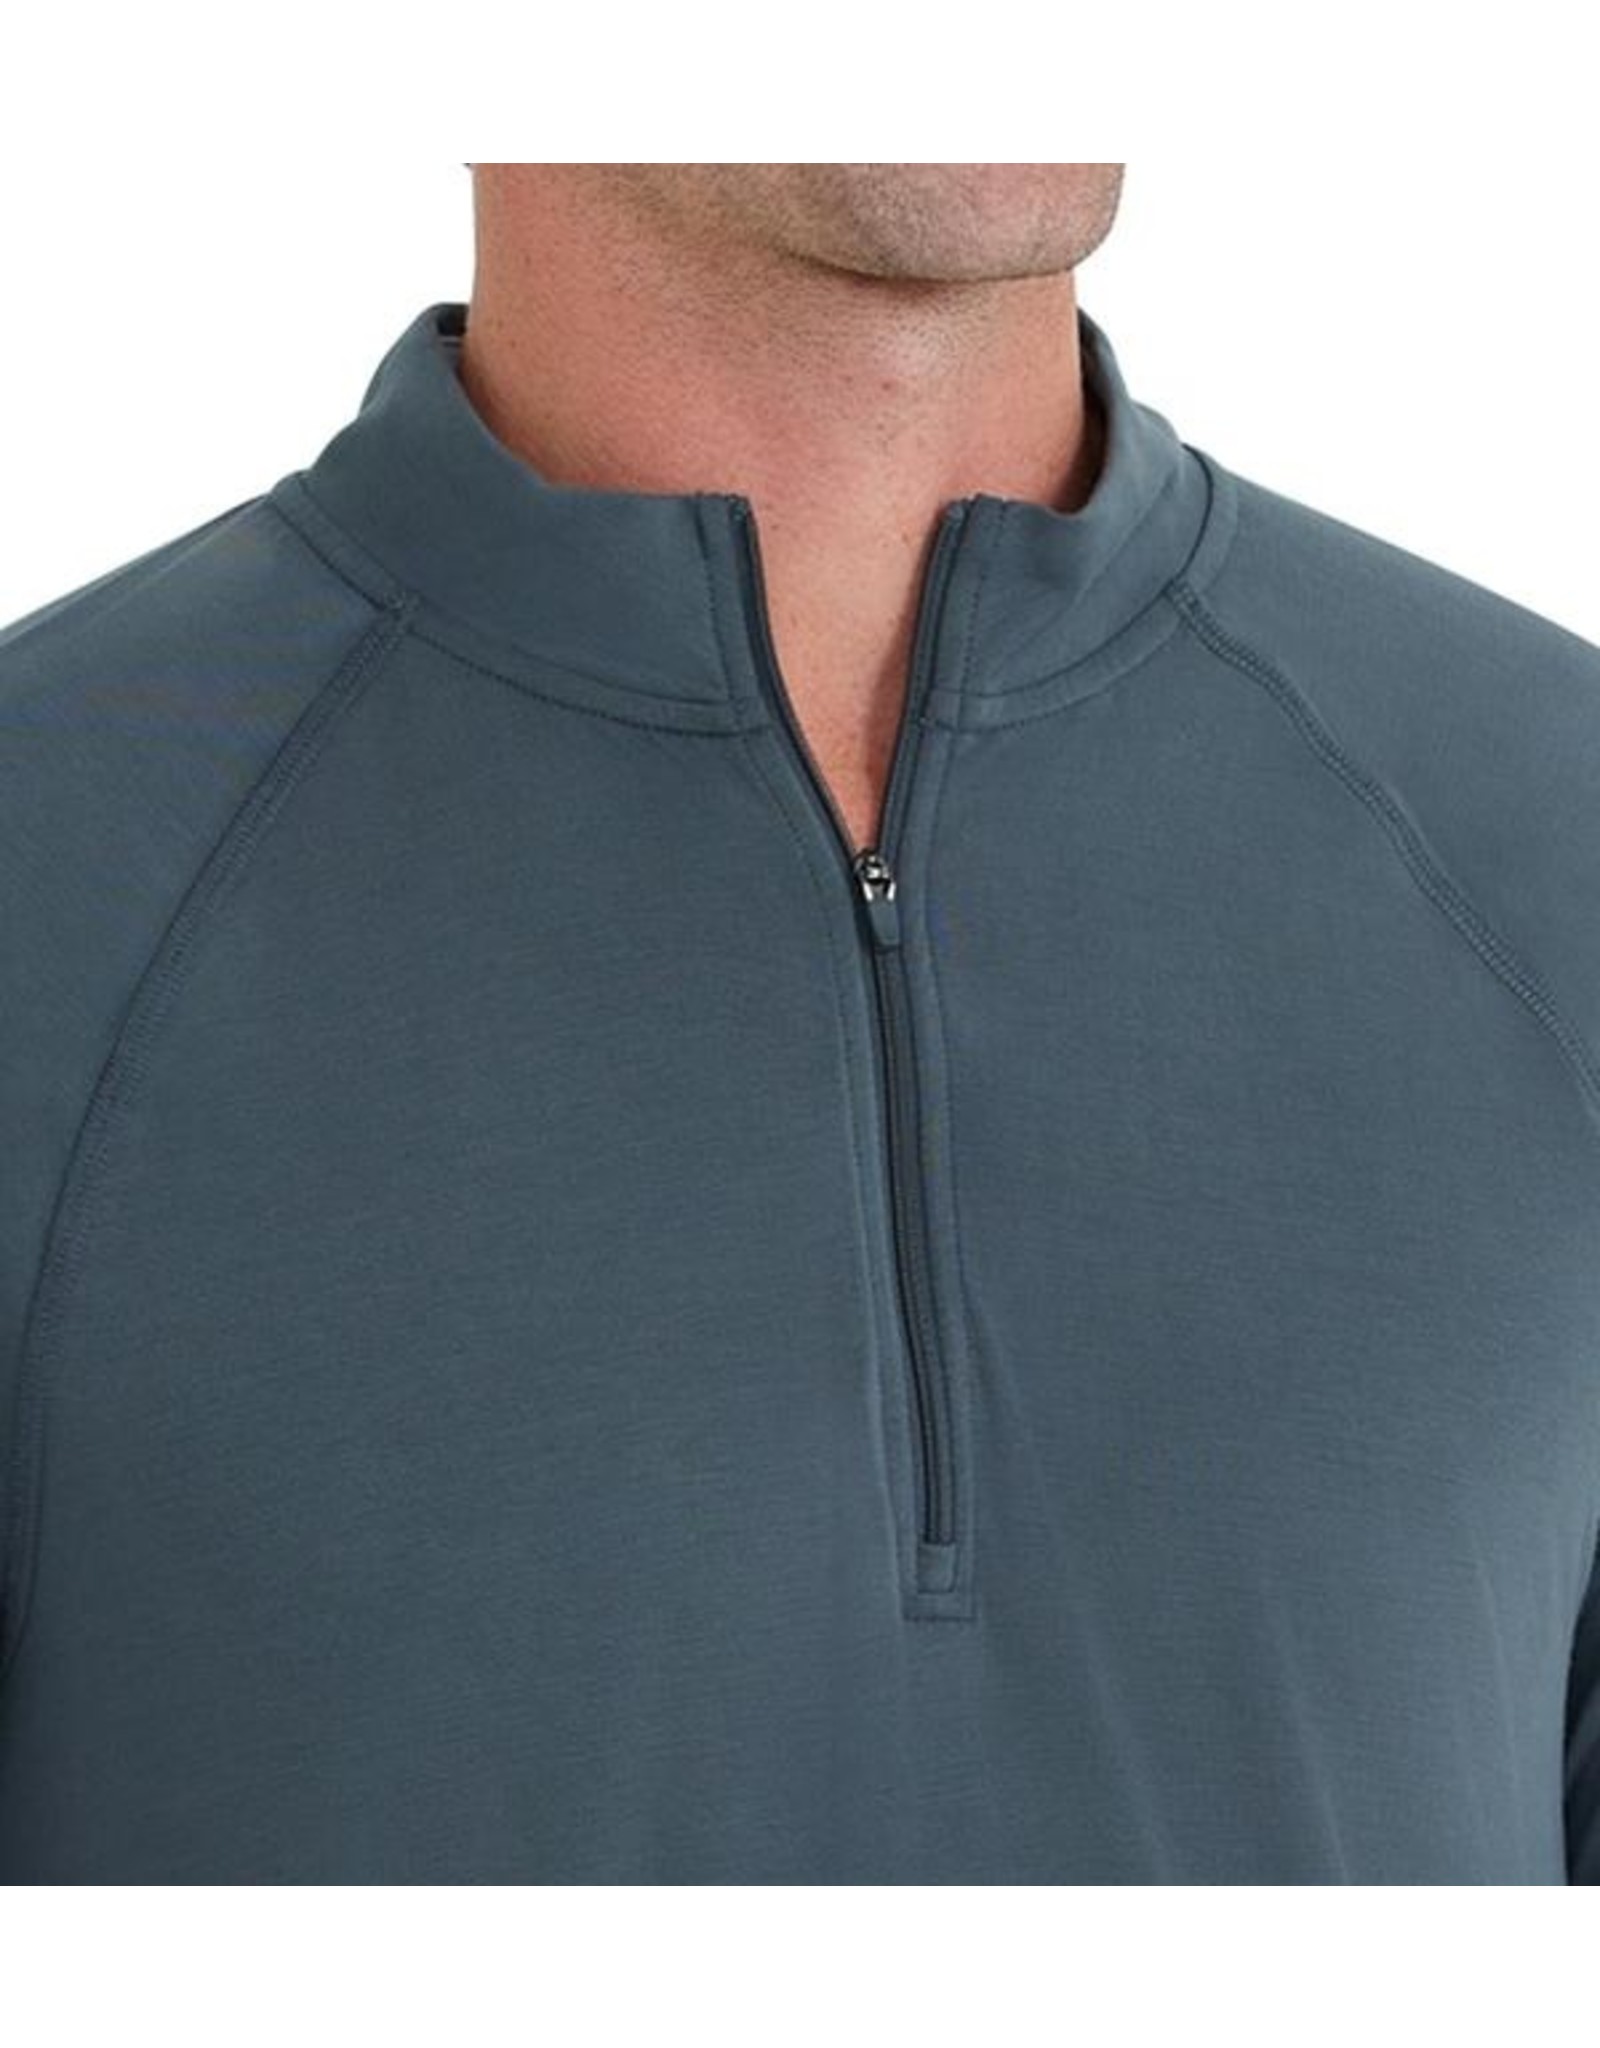 Free Fly Free Fly M's Bamboo Flex Quarter Zip